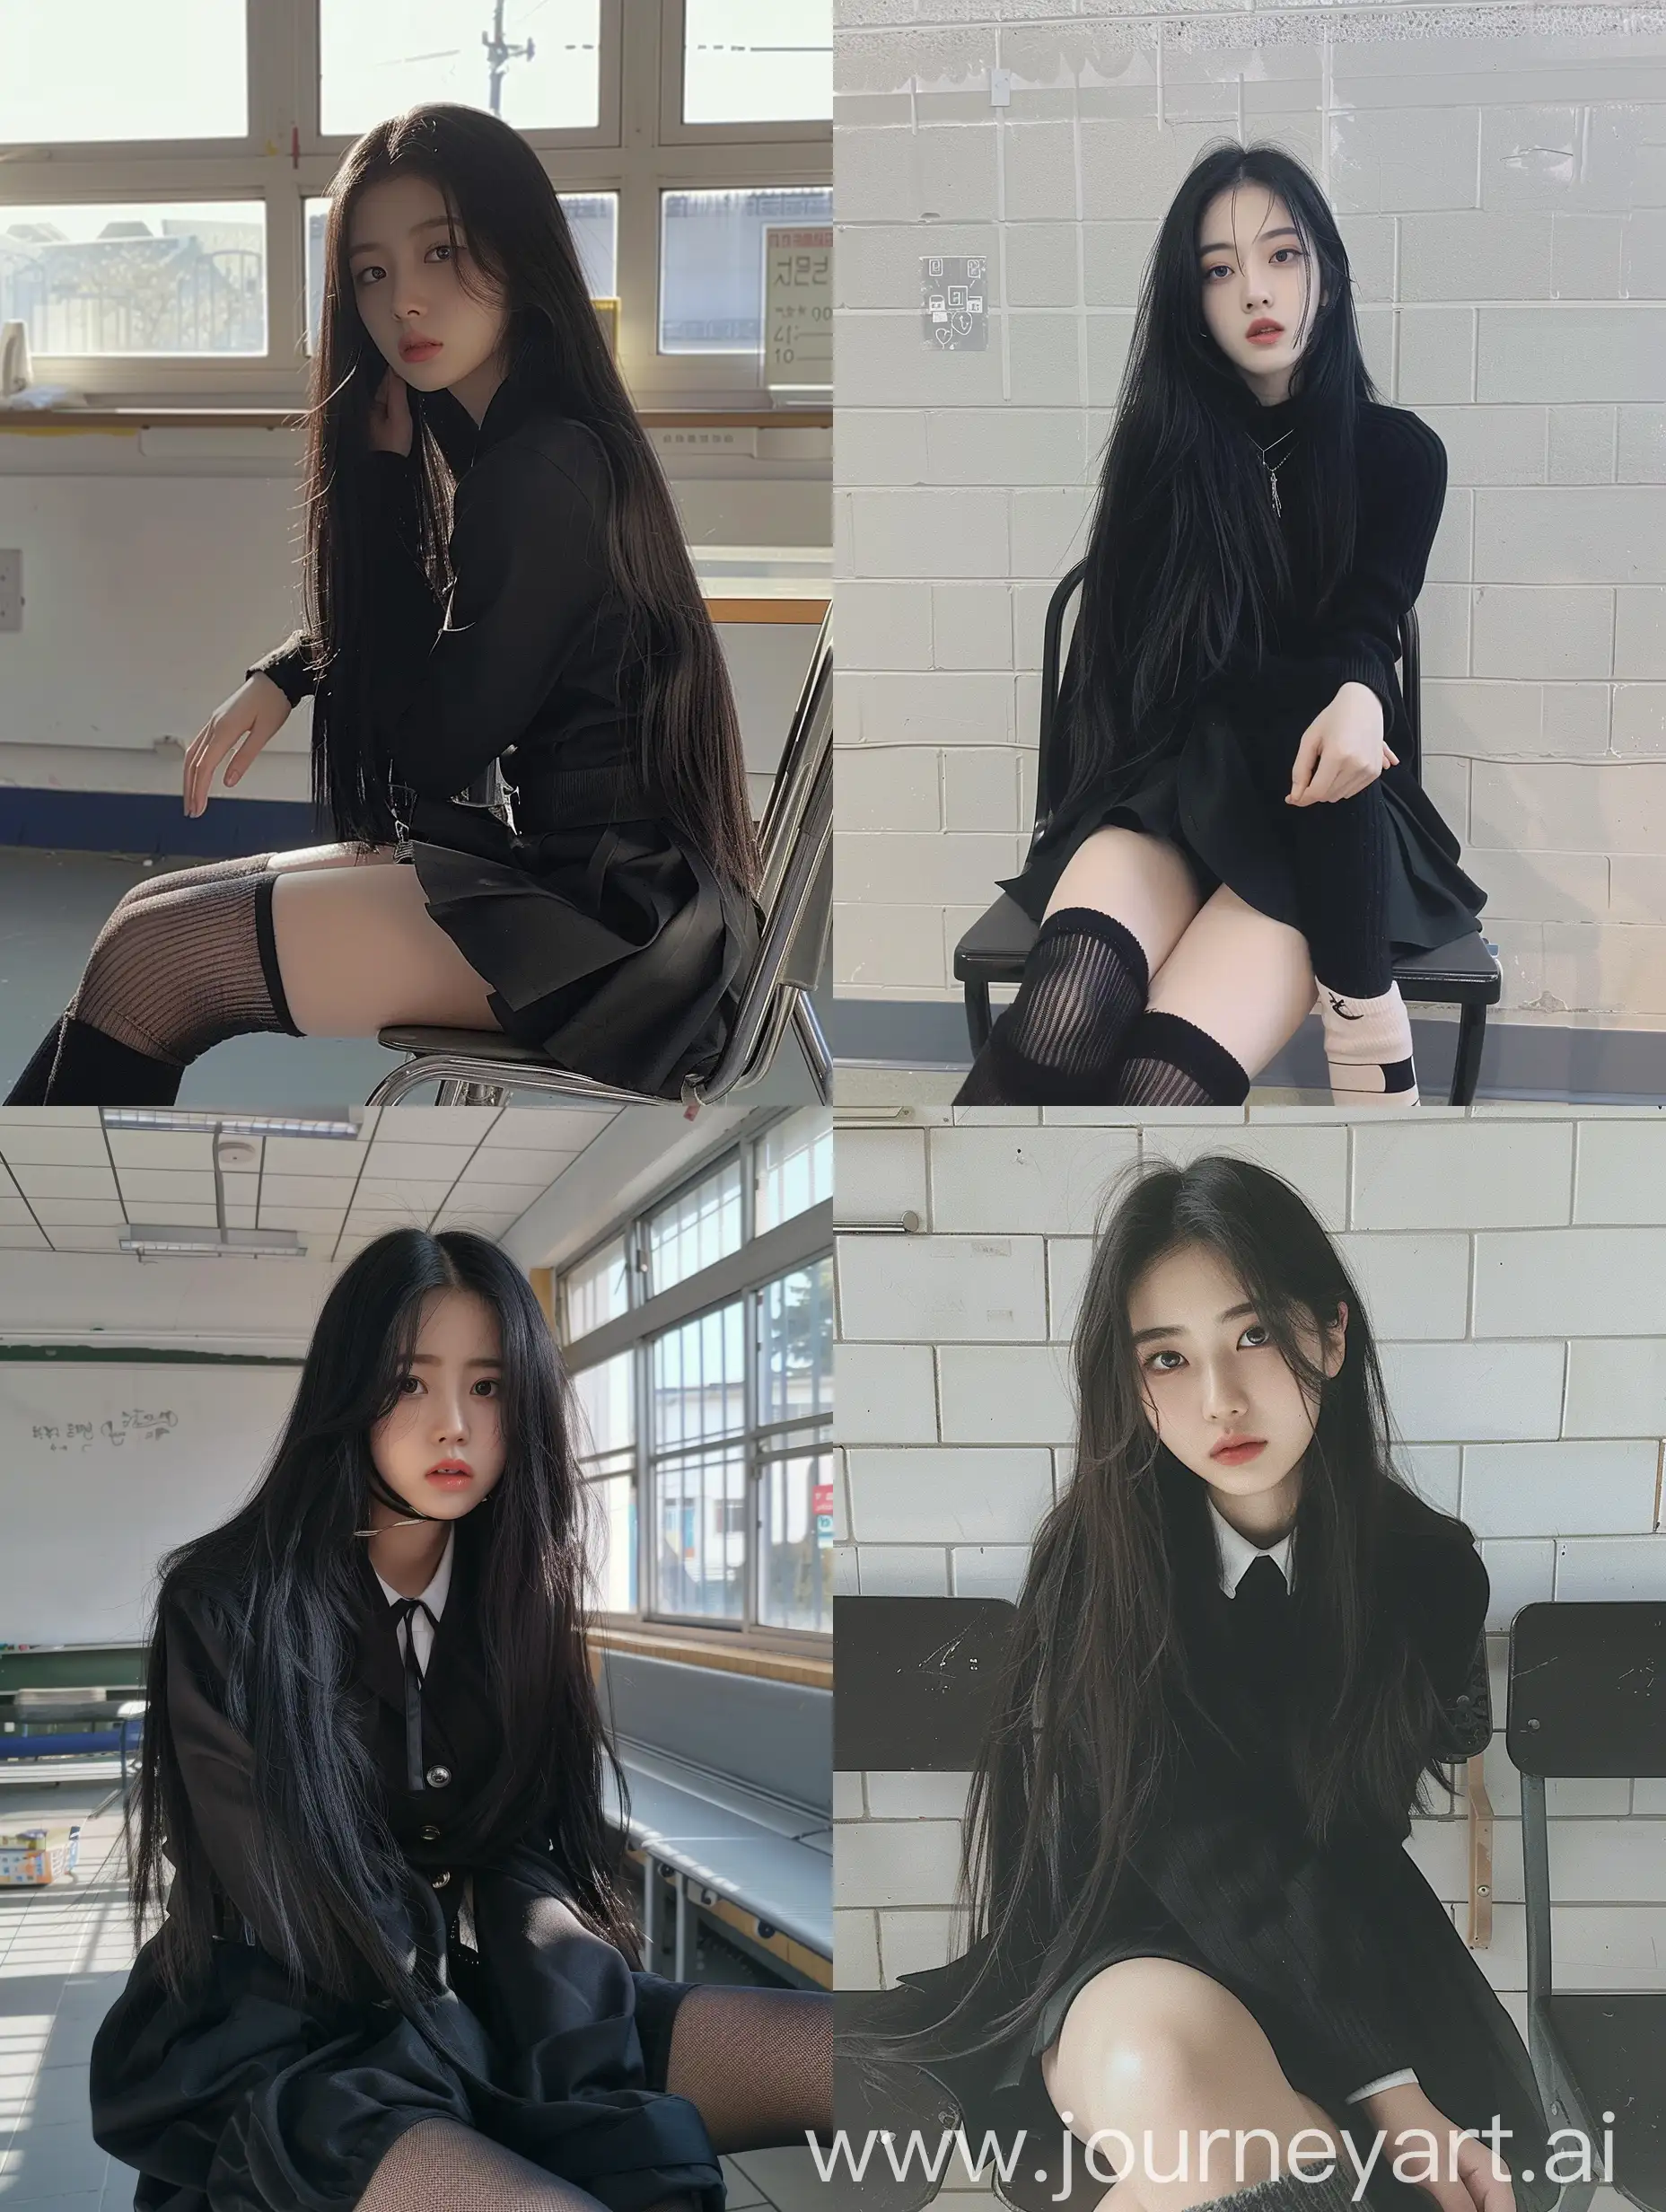 1 korean girl,    long  black hair ,   22  years  old,    influencer,    beauty   ,     in  the  school    ,school black  uniform  ,  makeup,   , sitting  on  chair  ,    socks  and  boots,    no  effect,     selfie   , iphone  selfie,      no  filters ,   iphone  photo    natural